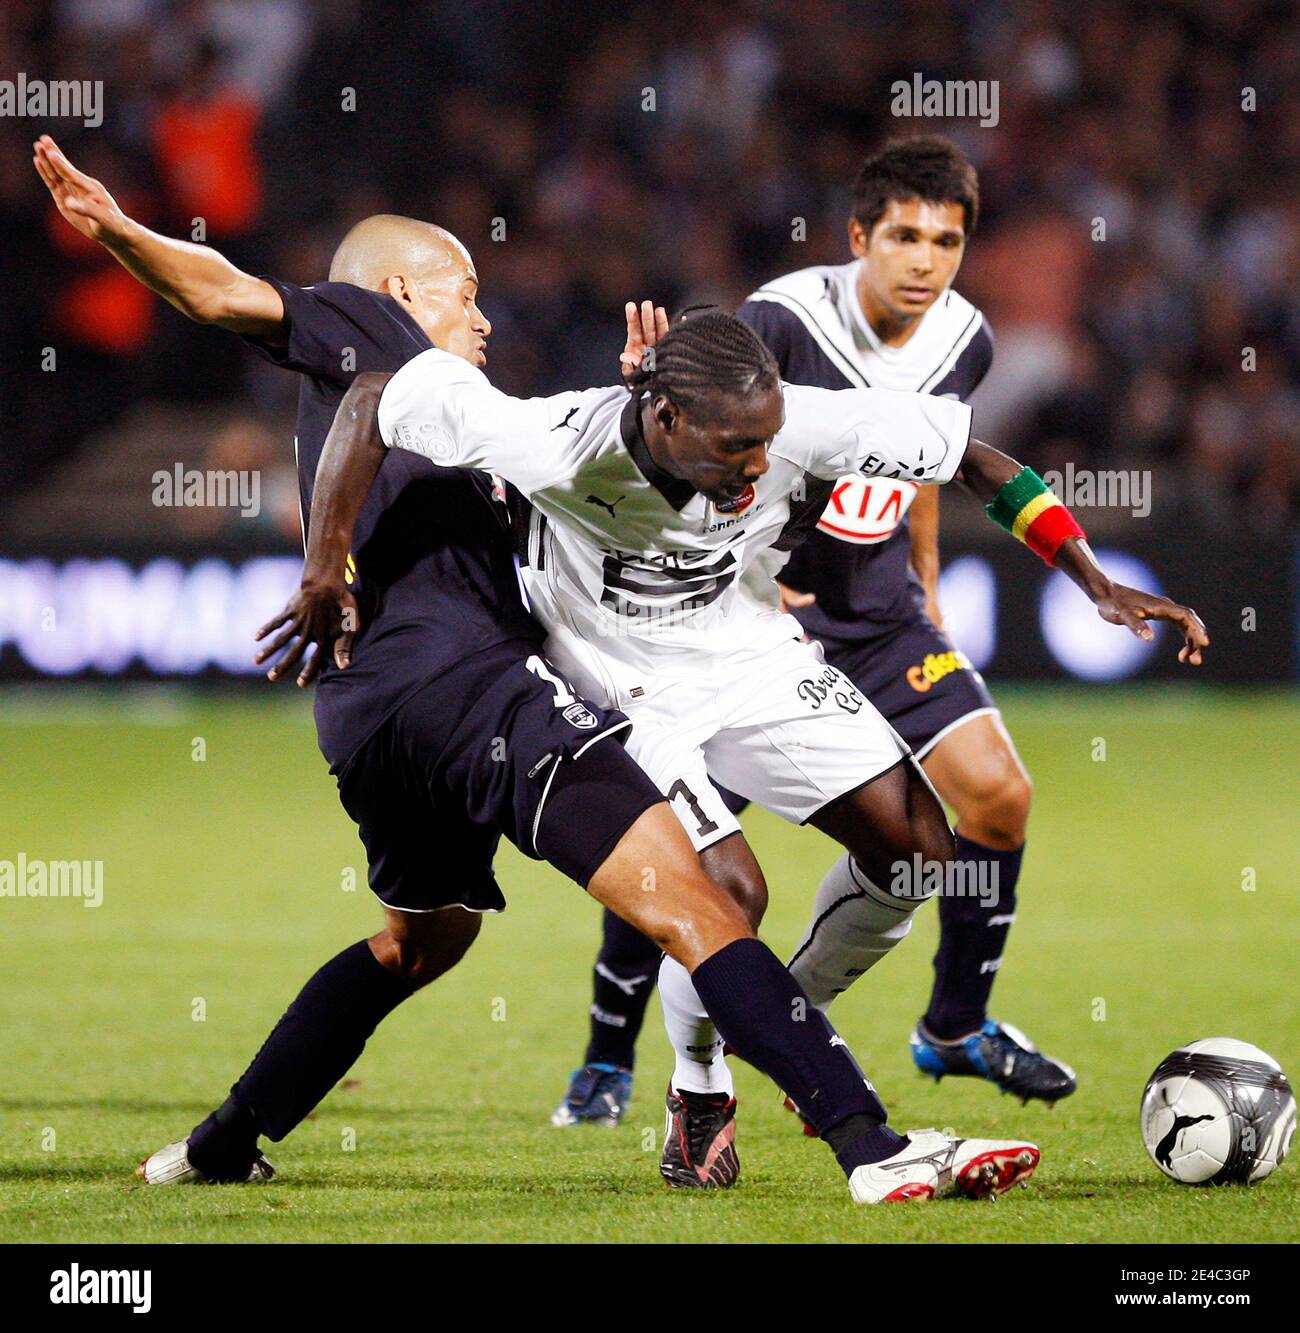 Bordeaux's Wendel and Rennes' Ismael Bangoura battle for the ball during the French First League Soccer match, Girondins de Bordeaux vs Stade Rennais at Chaban Delmas stadium in Bordeaux, France on September 27, 2009. Bordeaux won 1-0. Photo by Patrick Bernard/Cameleon/ABACAPRESS.COM Stock Photo